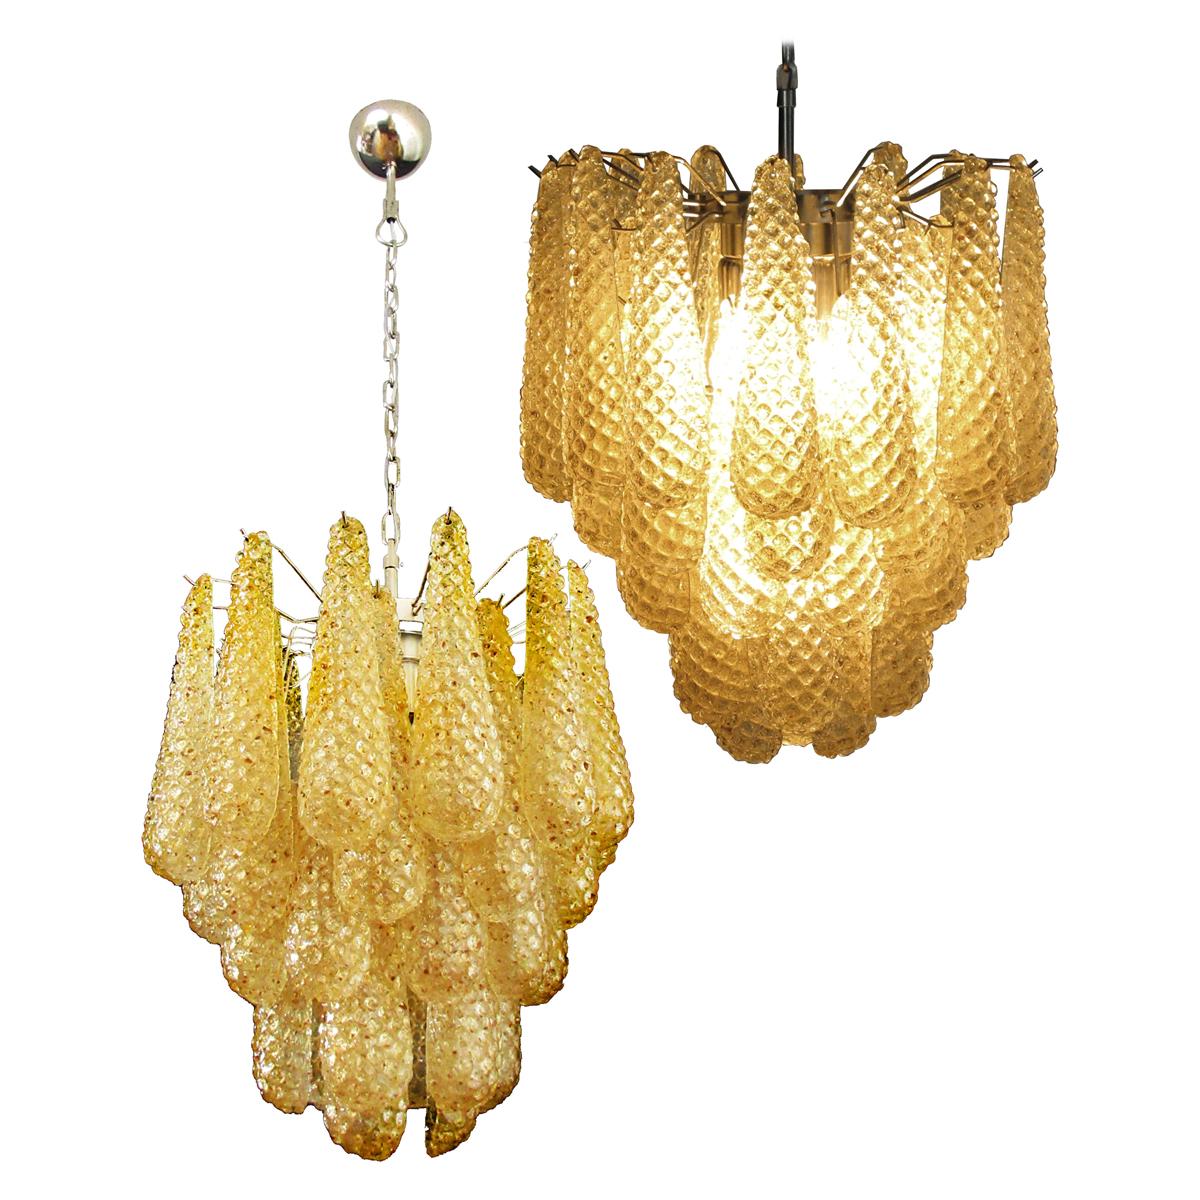 Pair of Italian White and Amber Glass Chandeliers For Sale at 1stDibs